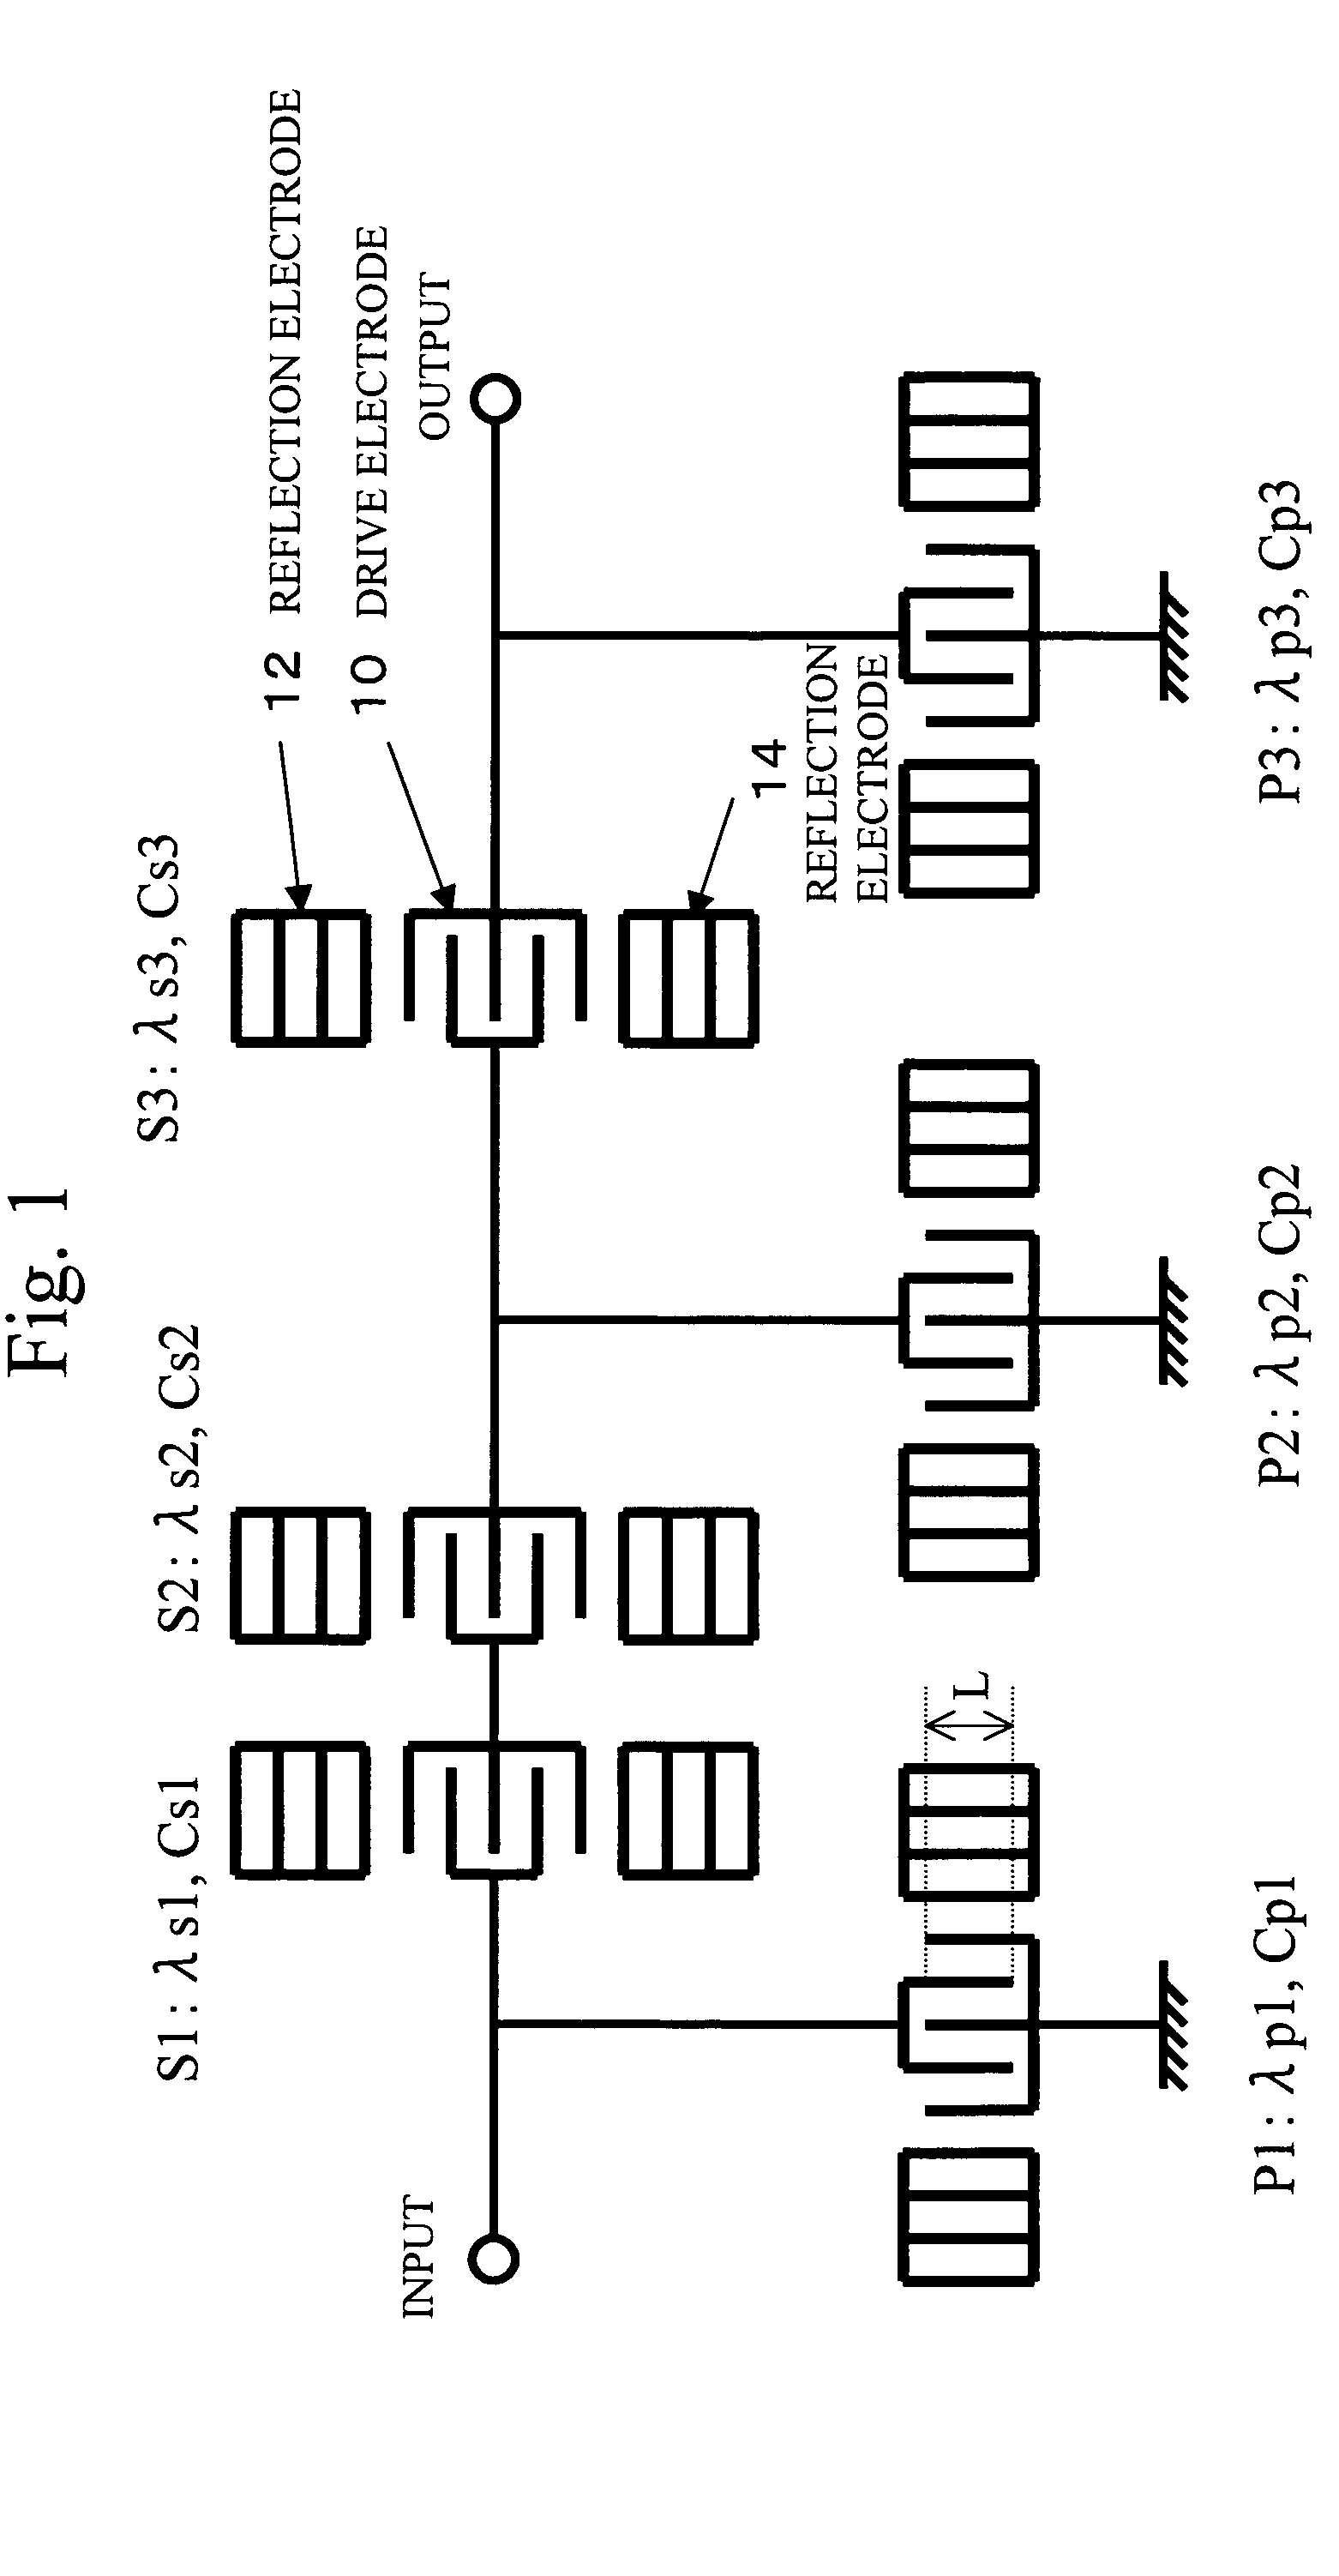 Surface acoustic wave ladder filter device having resonators with different electrode pitches and electrostatic capacitances